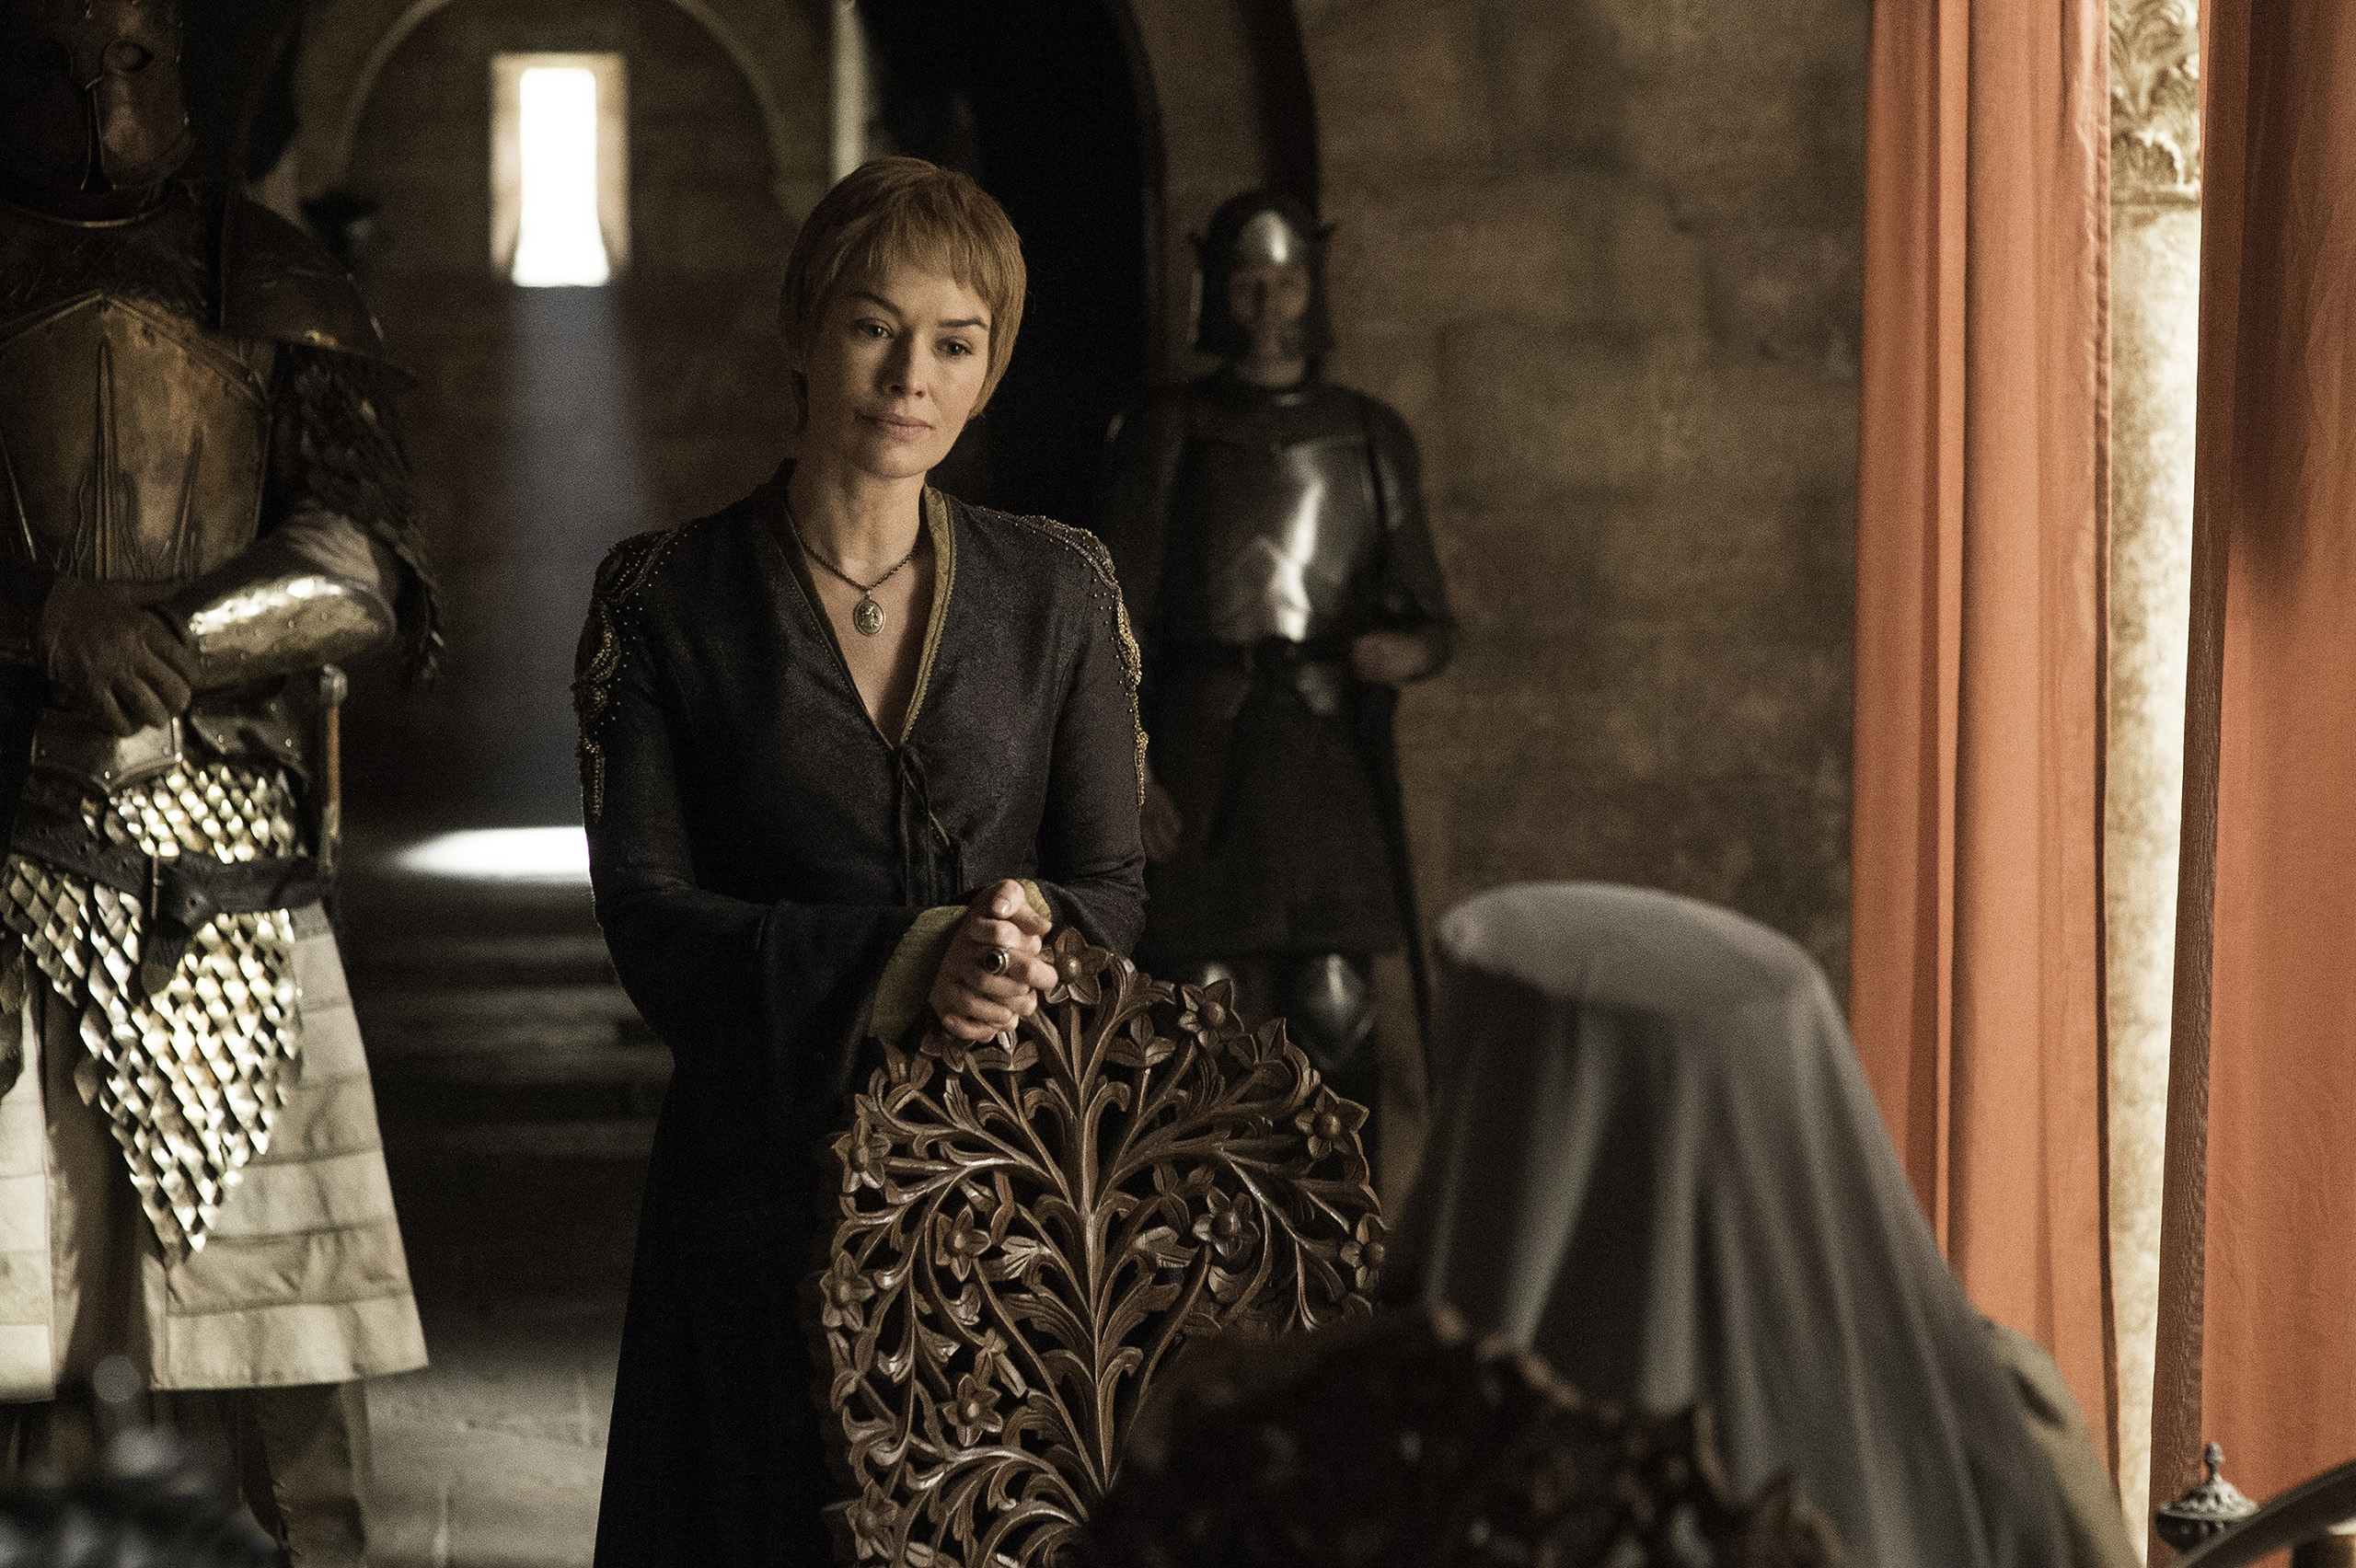 Lena Headey as Cersei Lannister in Game of Thrones.